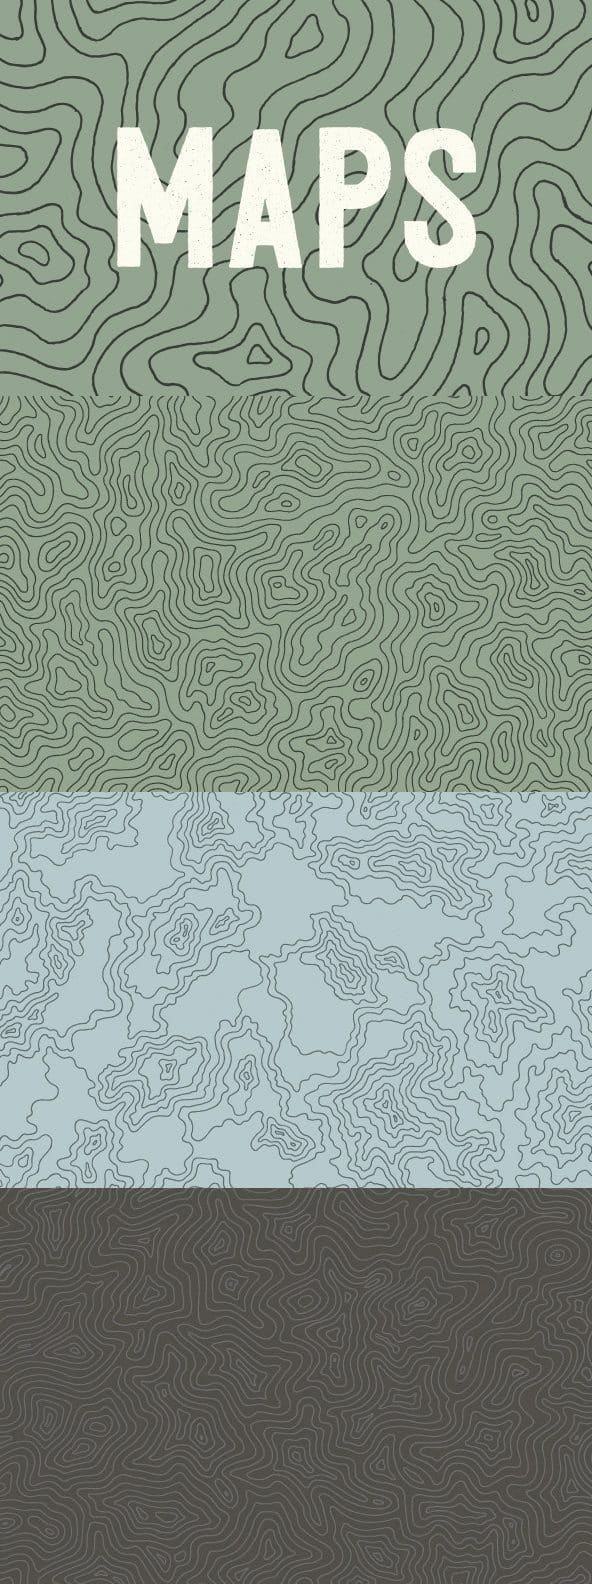 Patterns | Topographic Elevation Maps This hand-illustrated set of t-